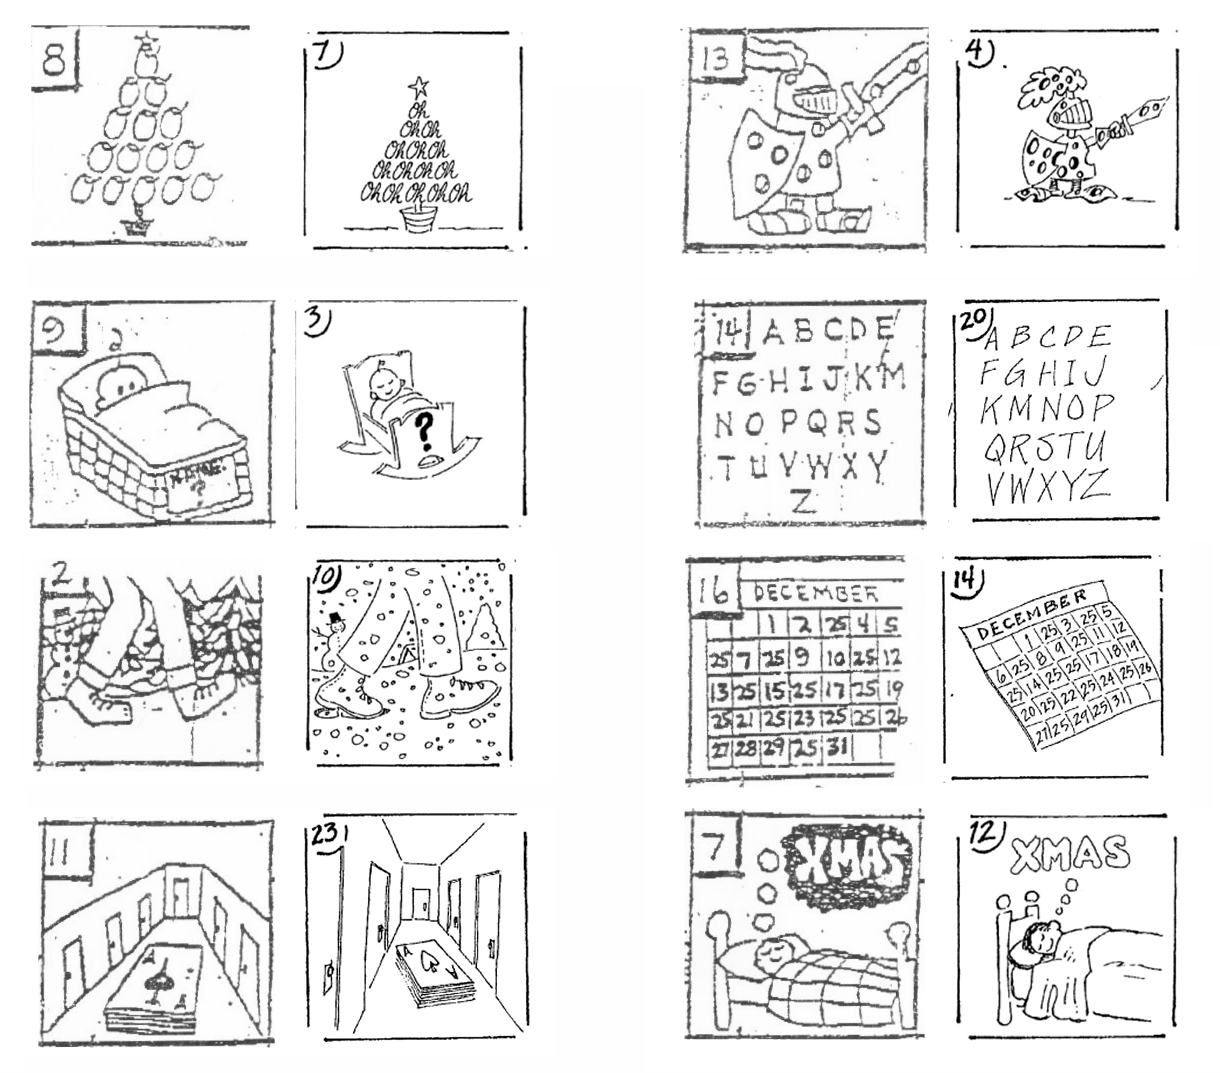 Search Results for “Christmas Carol Rebus Puzzles Printable” Calendar